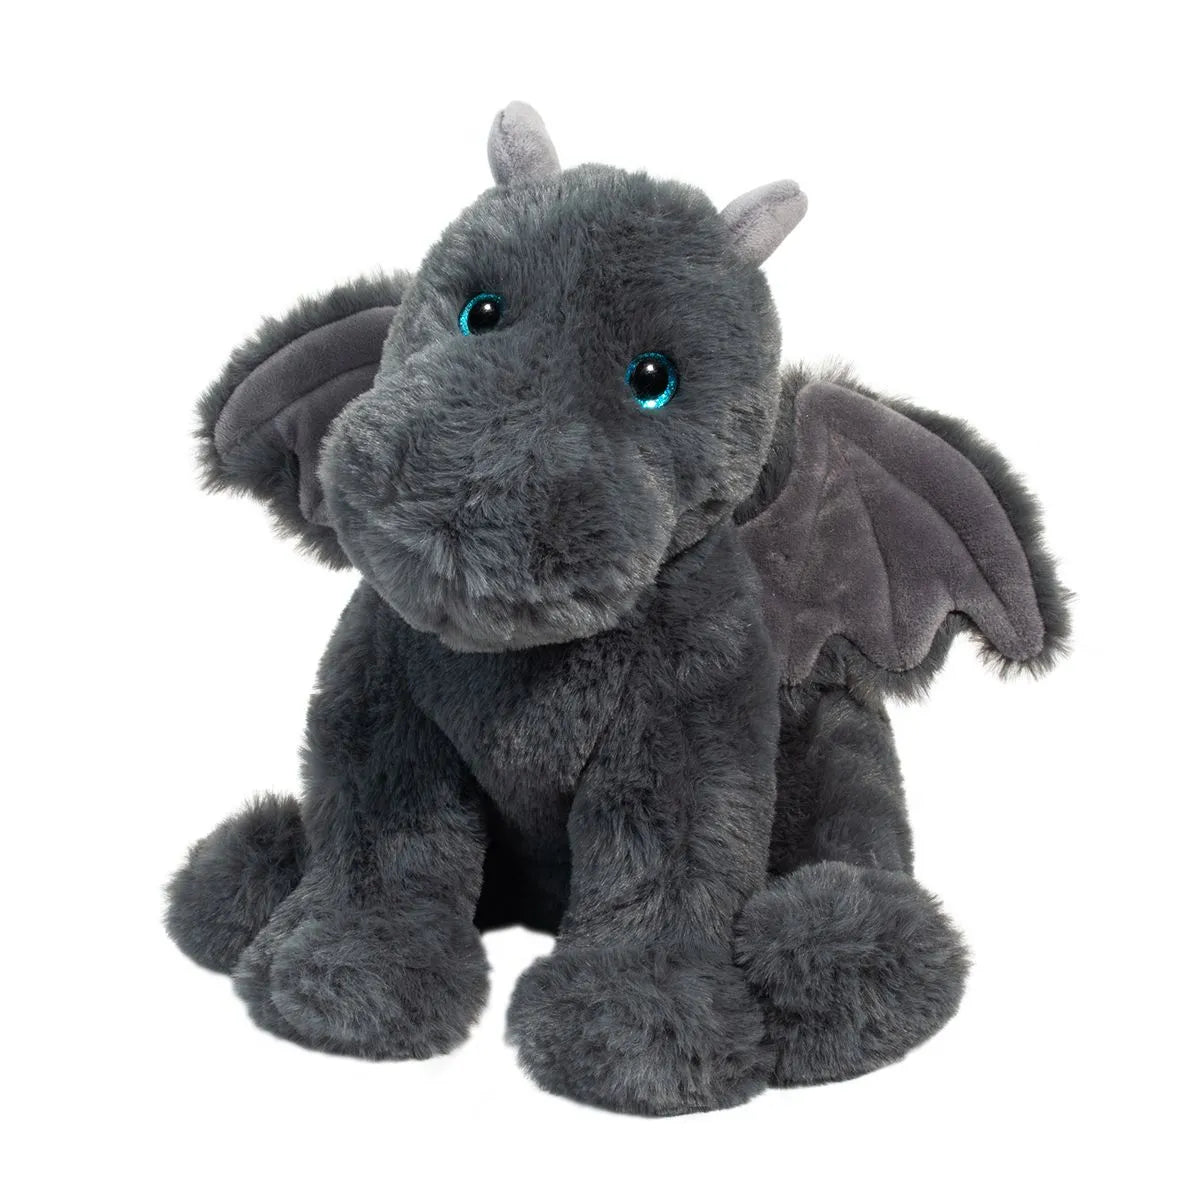 Sootie Dragon Large